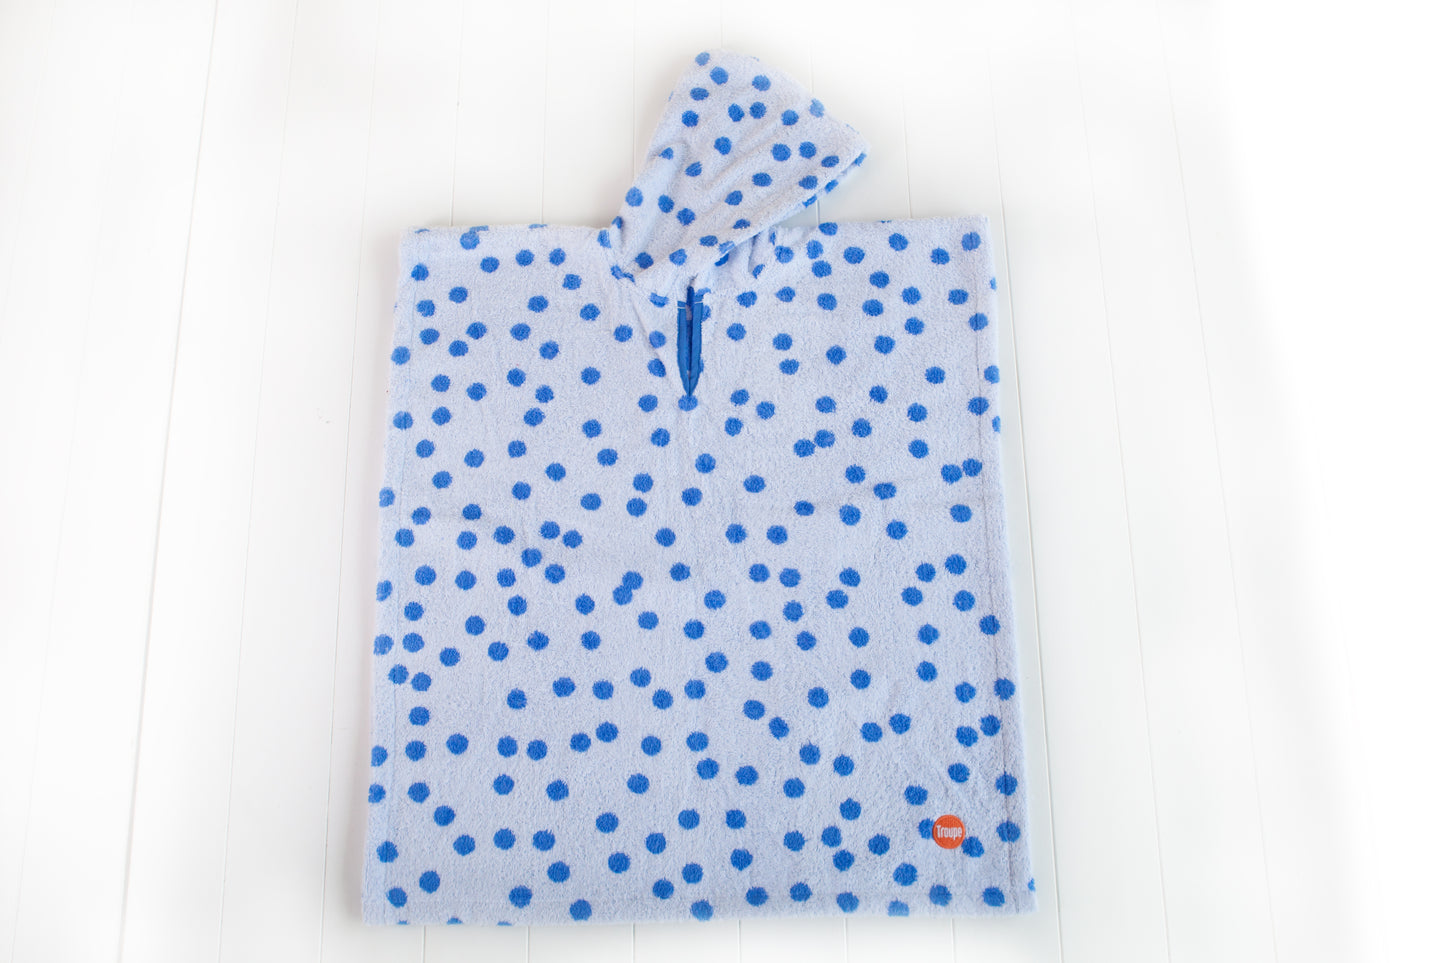 Kids Hooded Poncho - White with Blue Dot